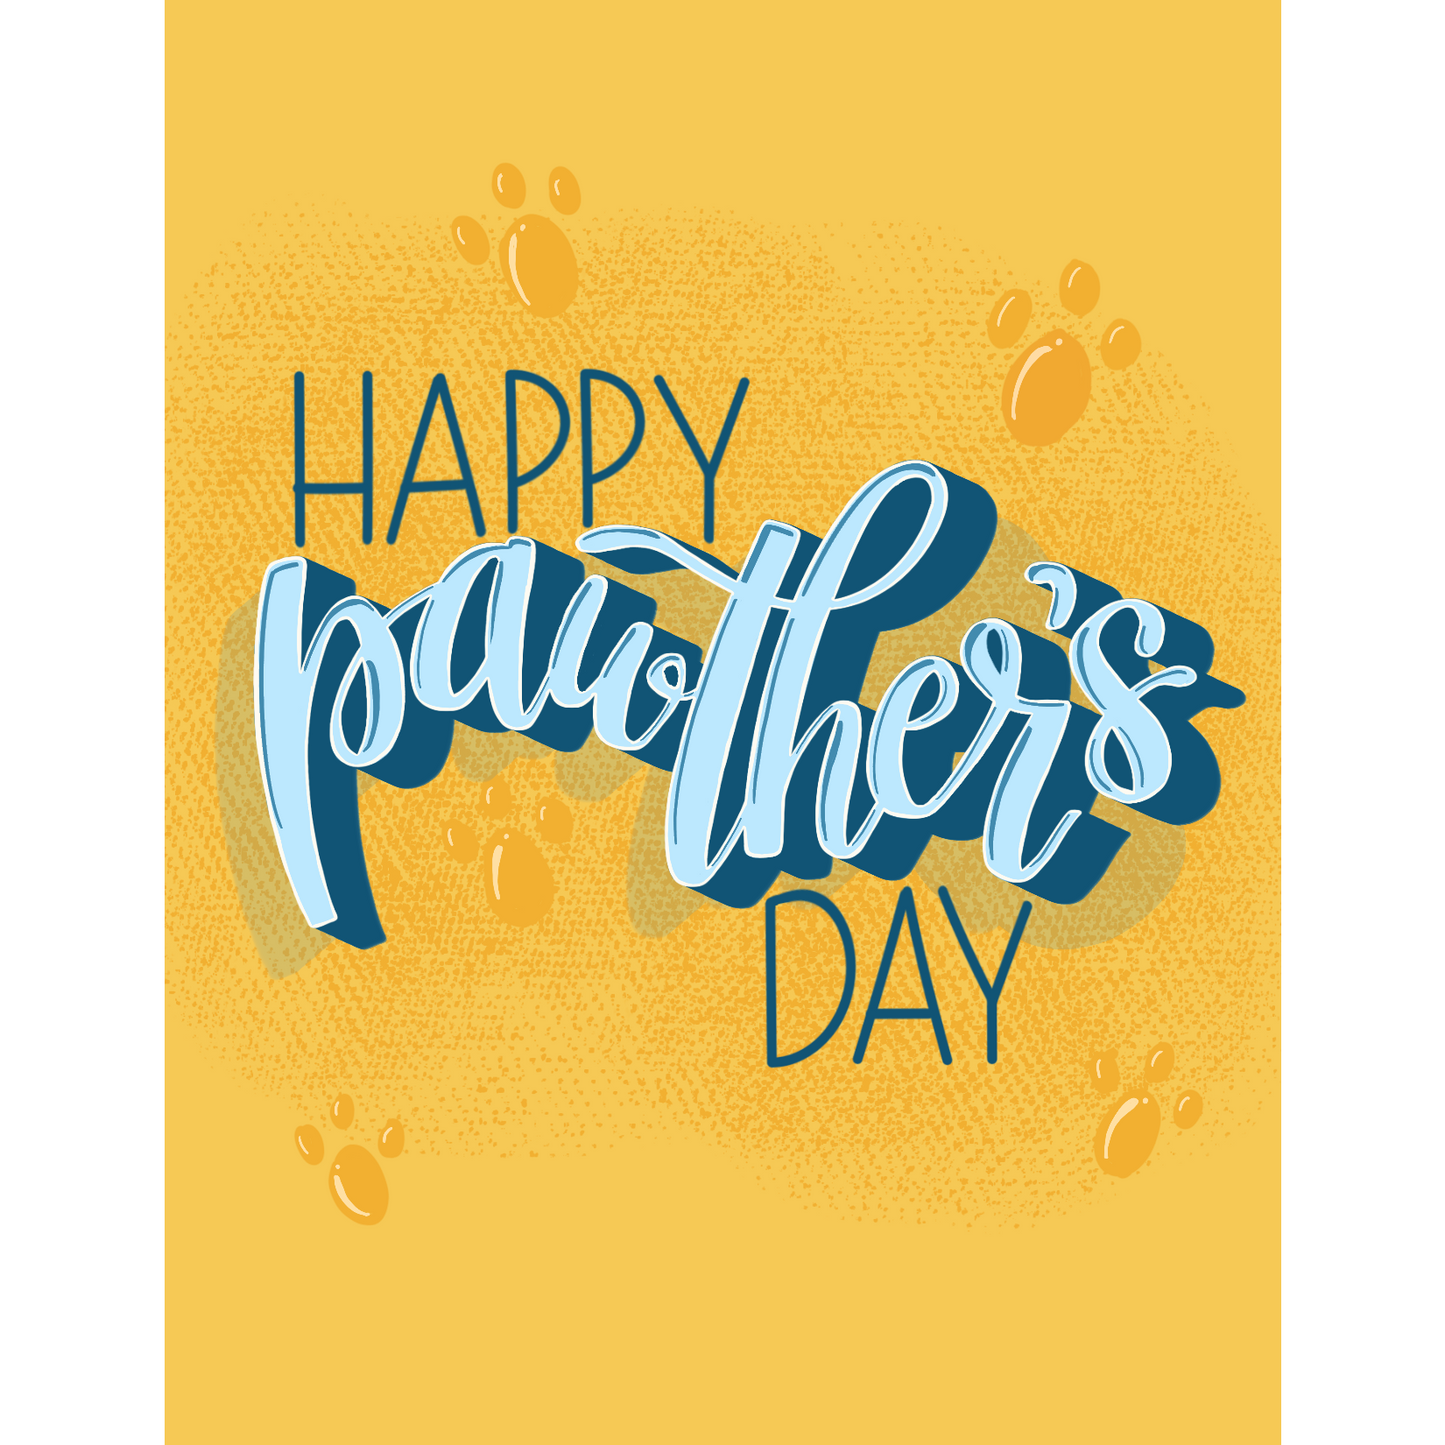 Happy Pawther's Day Card for Dog Dads and Cat Dads - Pet Lover Father's Day Printable Greeting Card